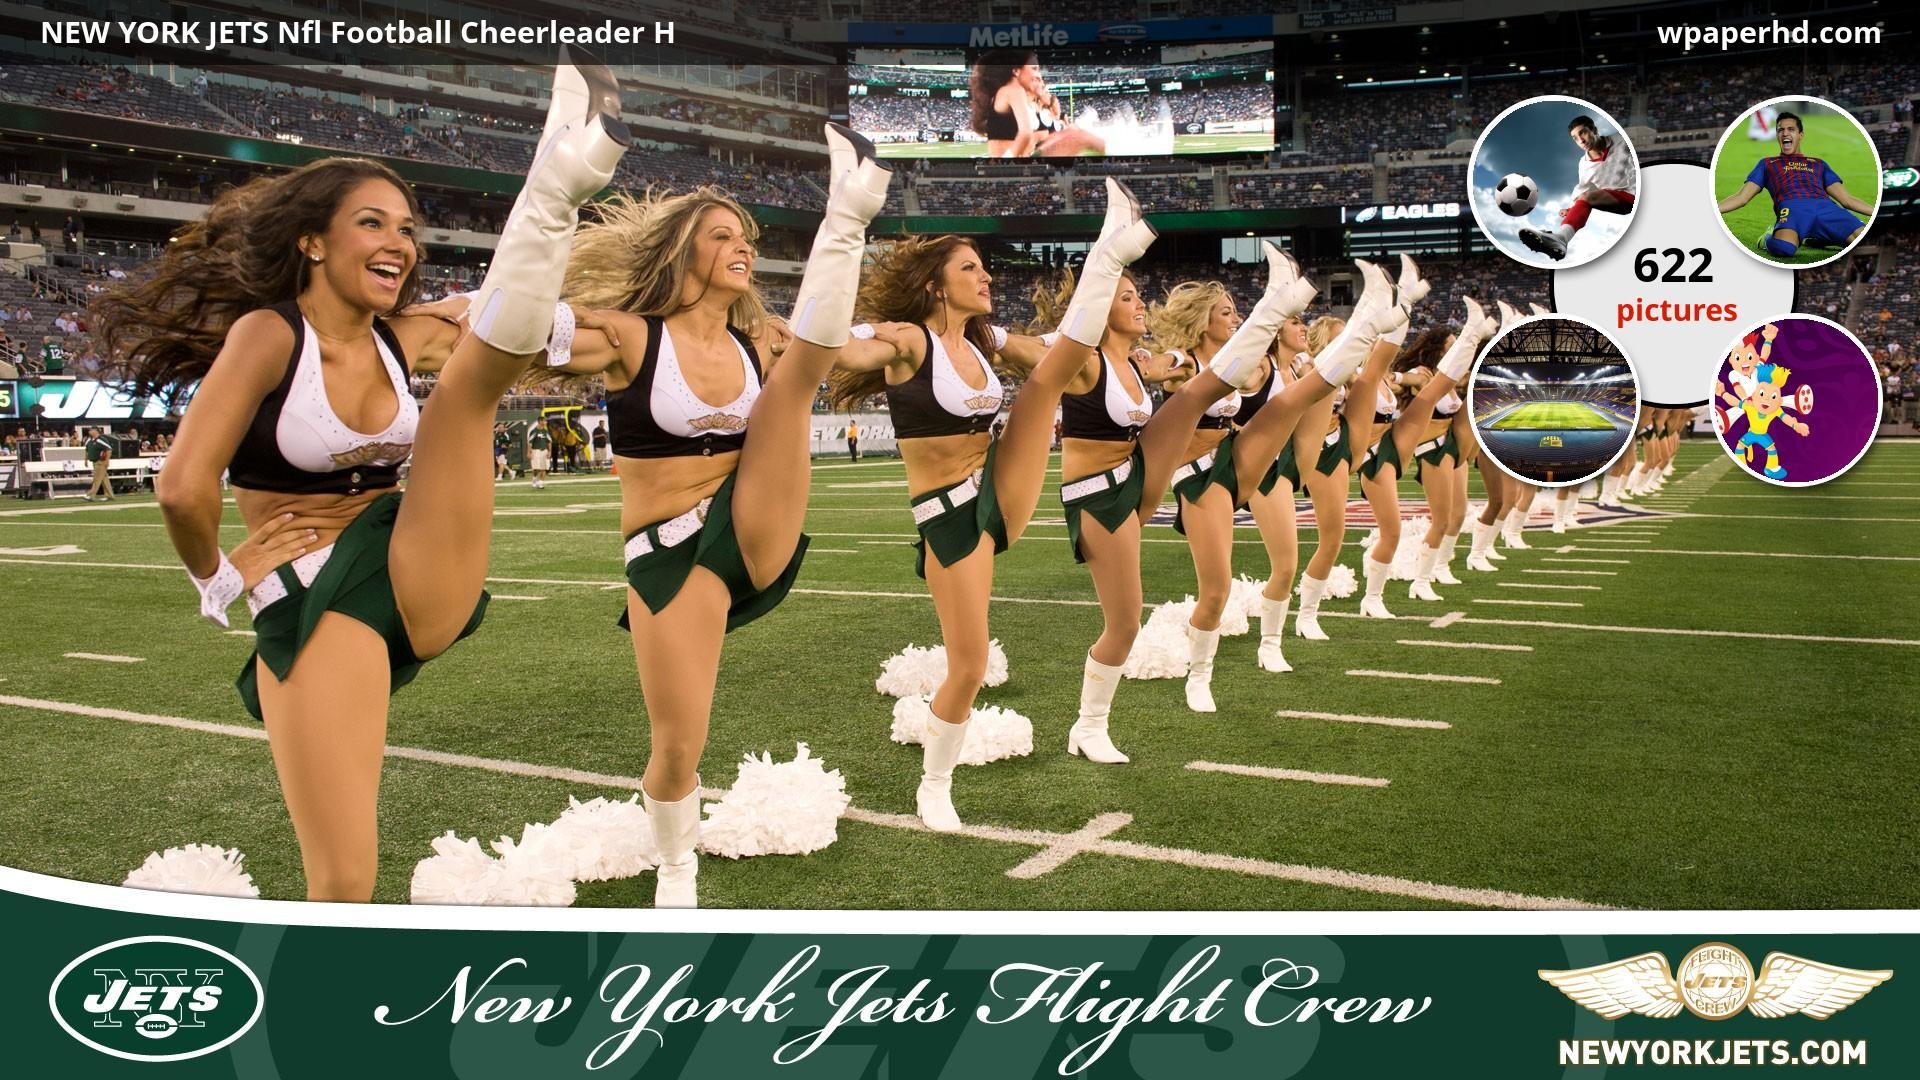 1920x1080 ... Football Cheerleader H wallpaper, where you can download this picture  in Original size and ...